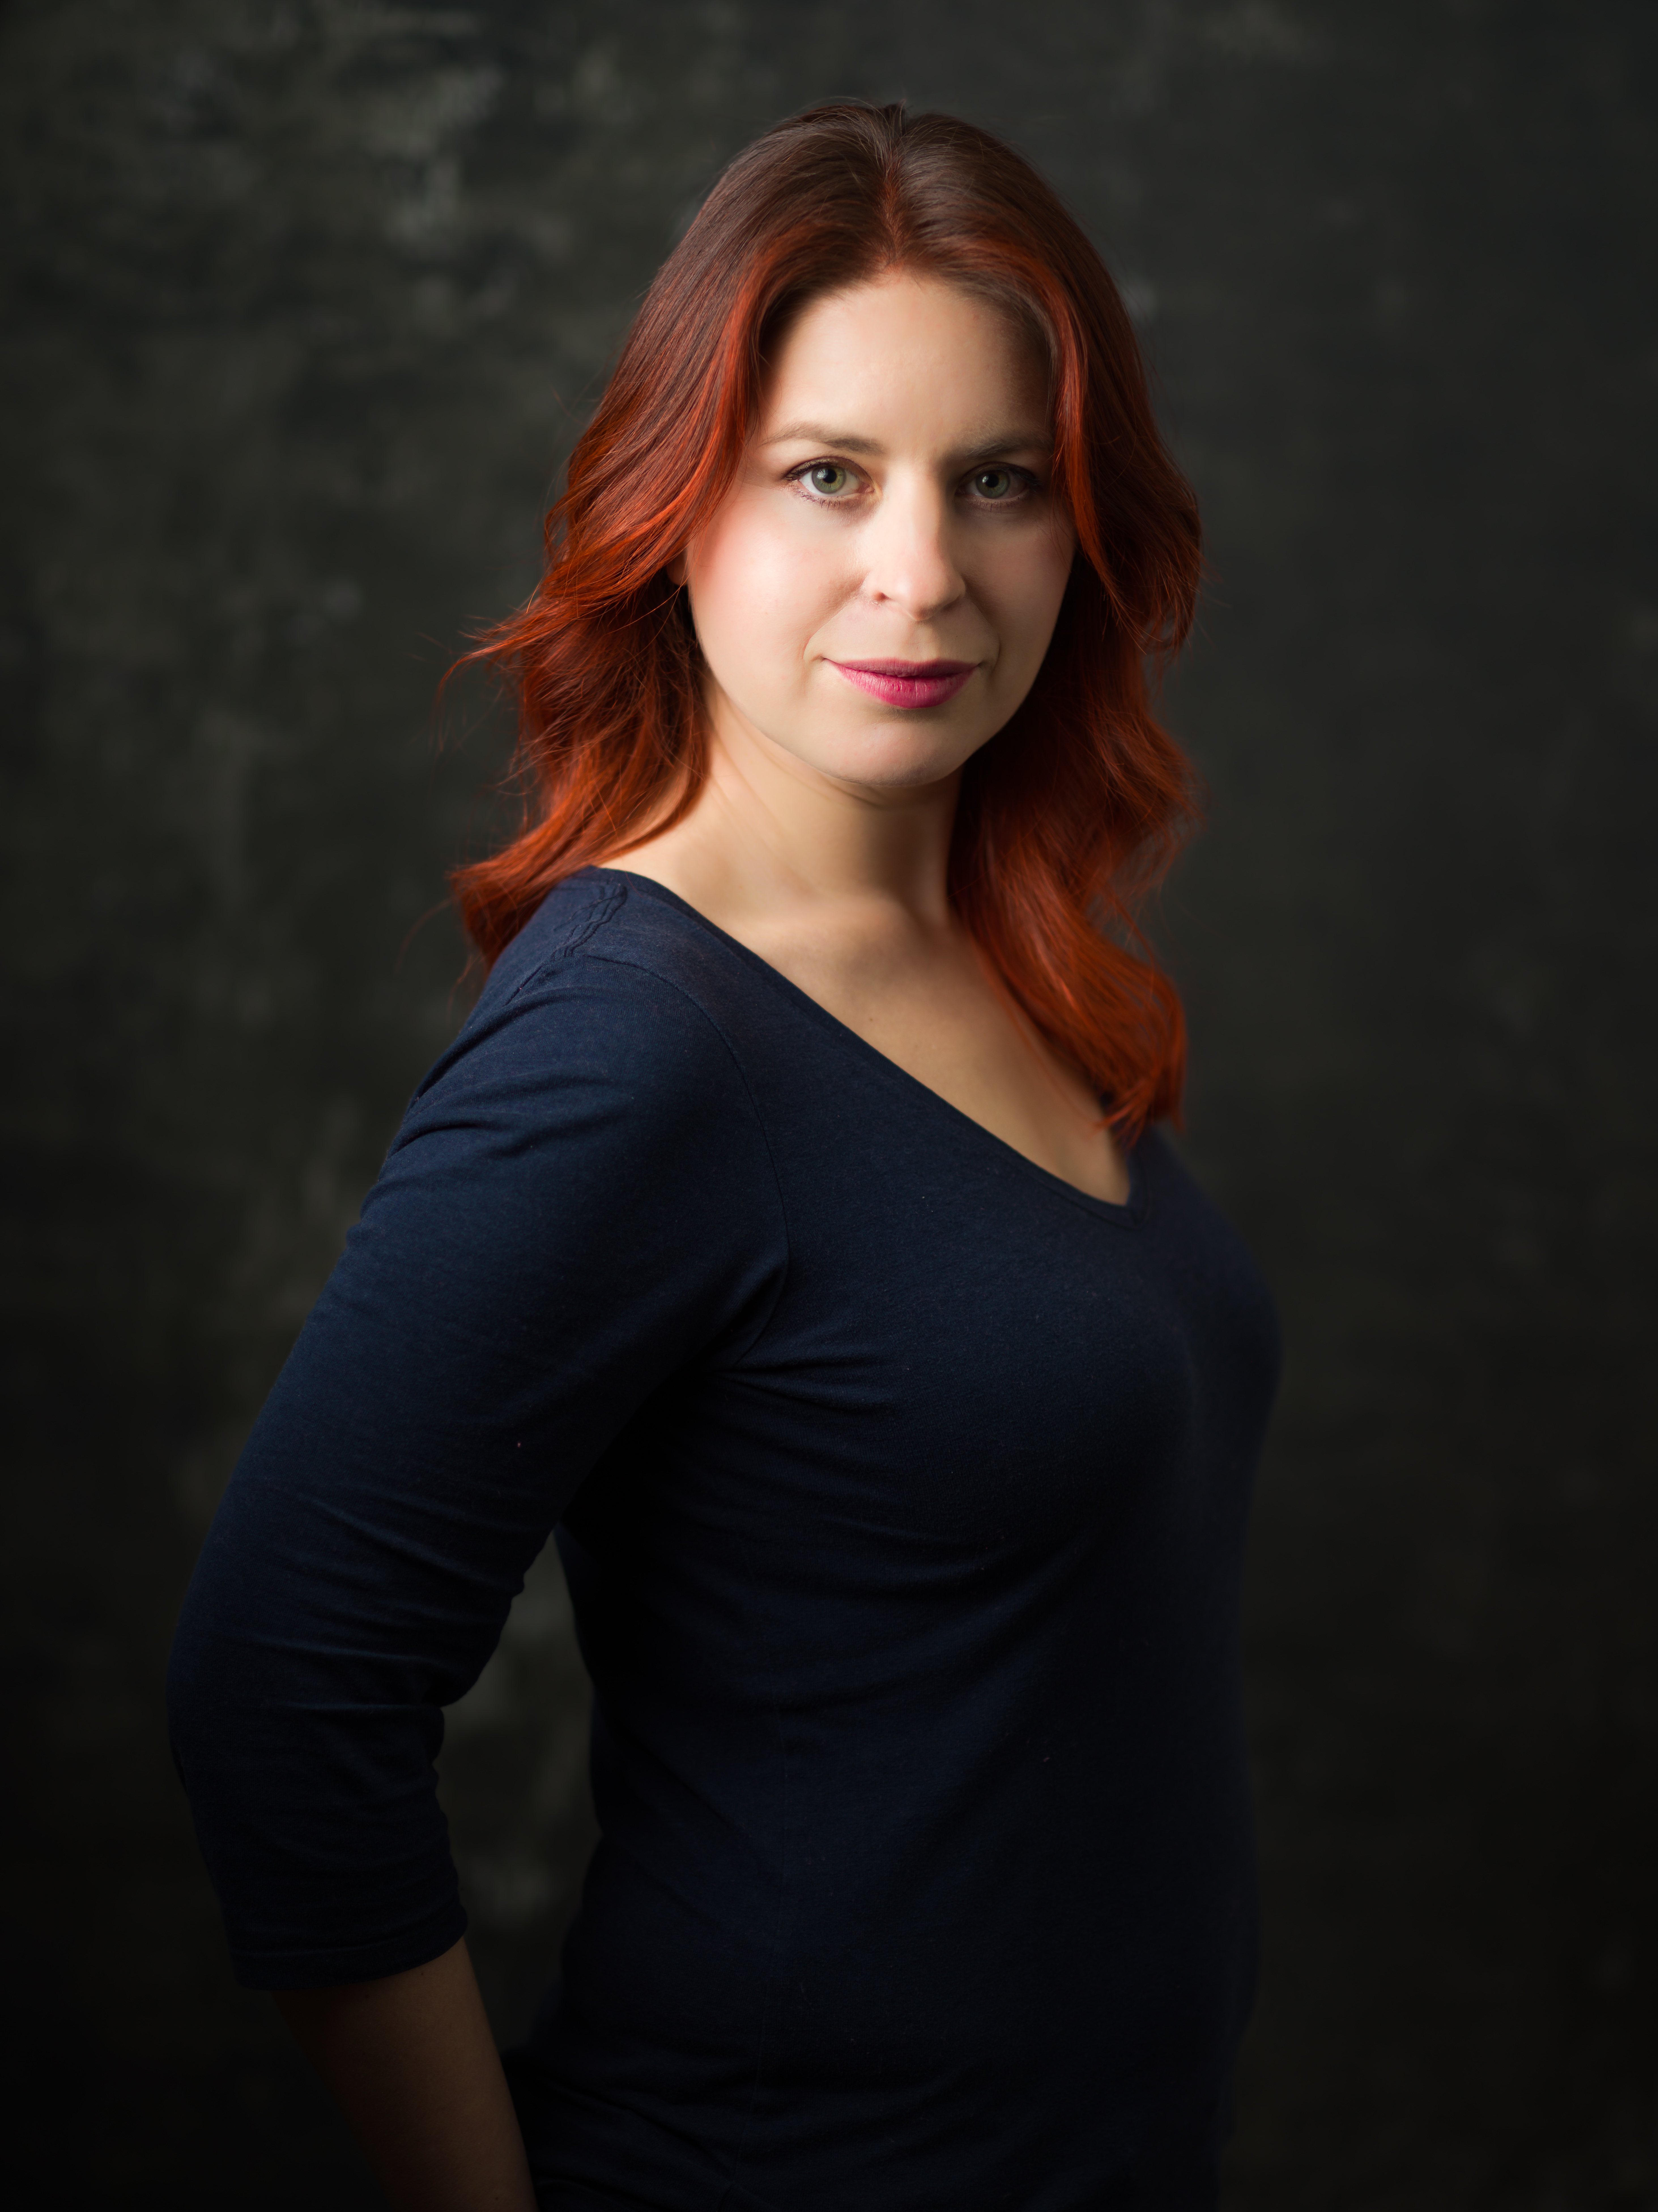 Author portrait photo of Holly Race. Holly is waring a navy blue top and is looking to the camera. She has dark red hair